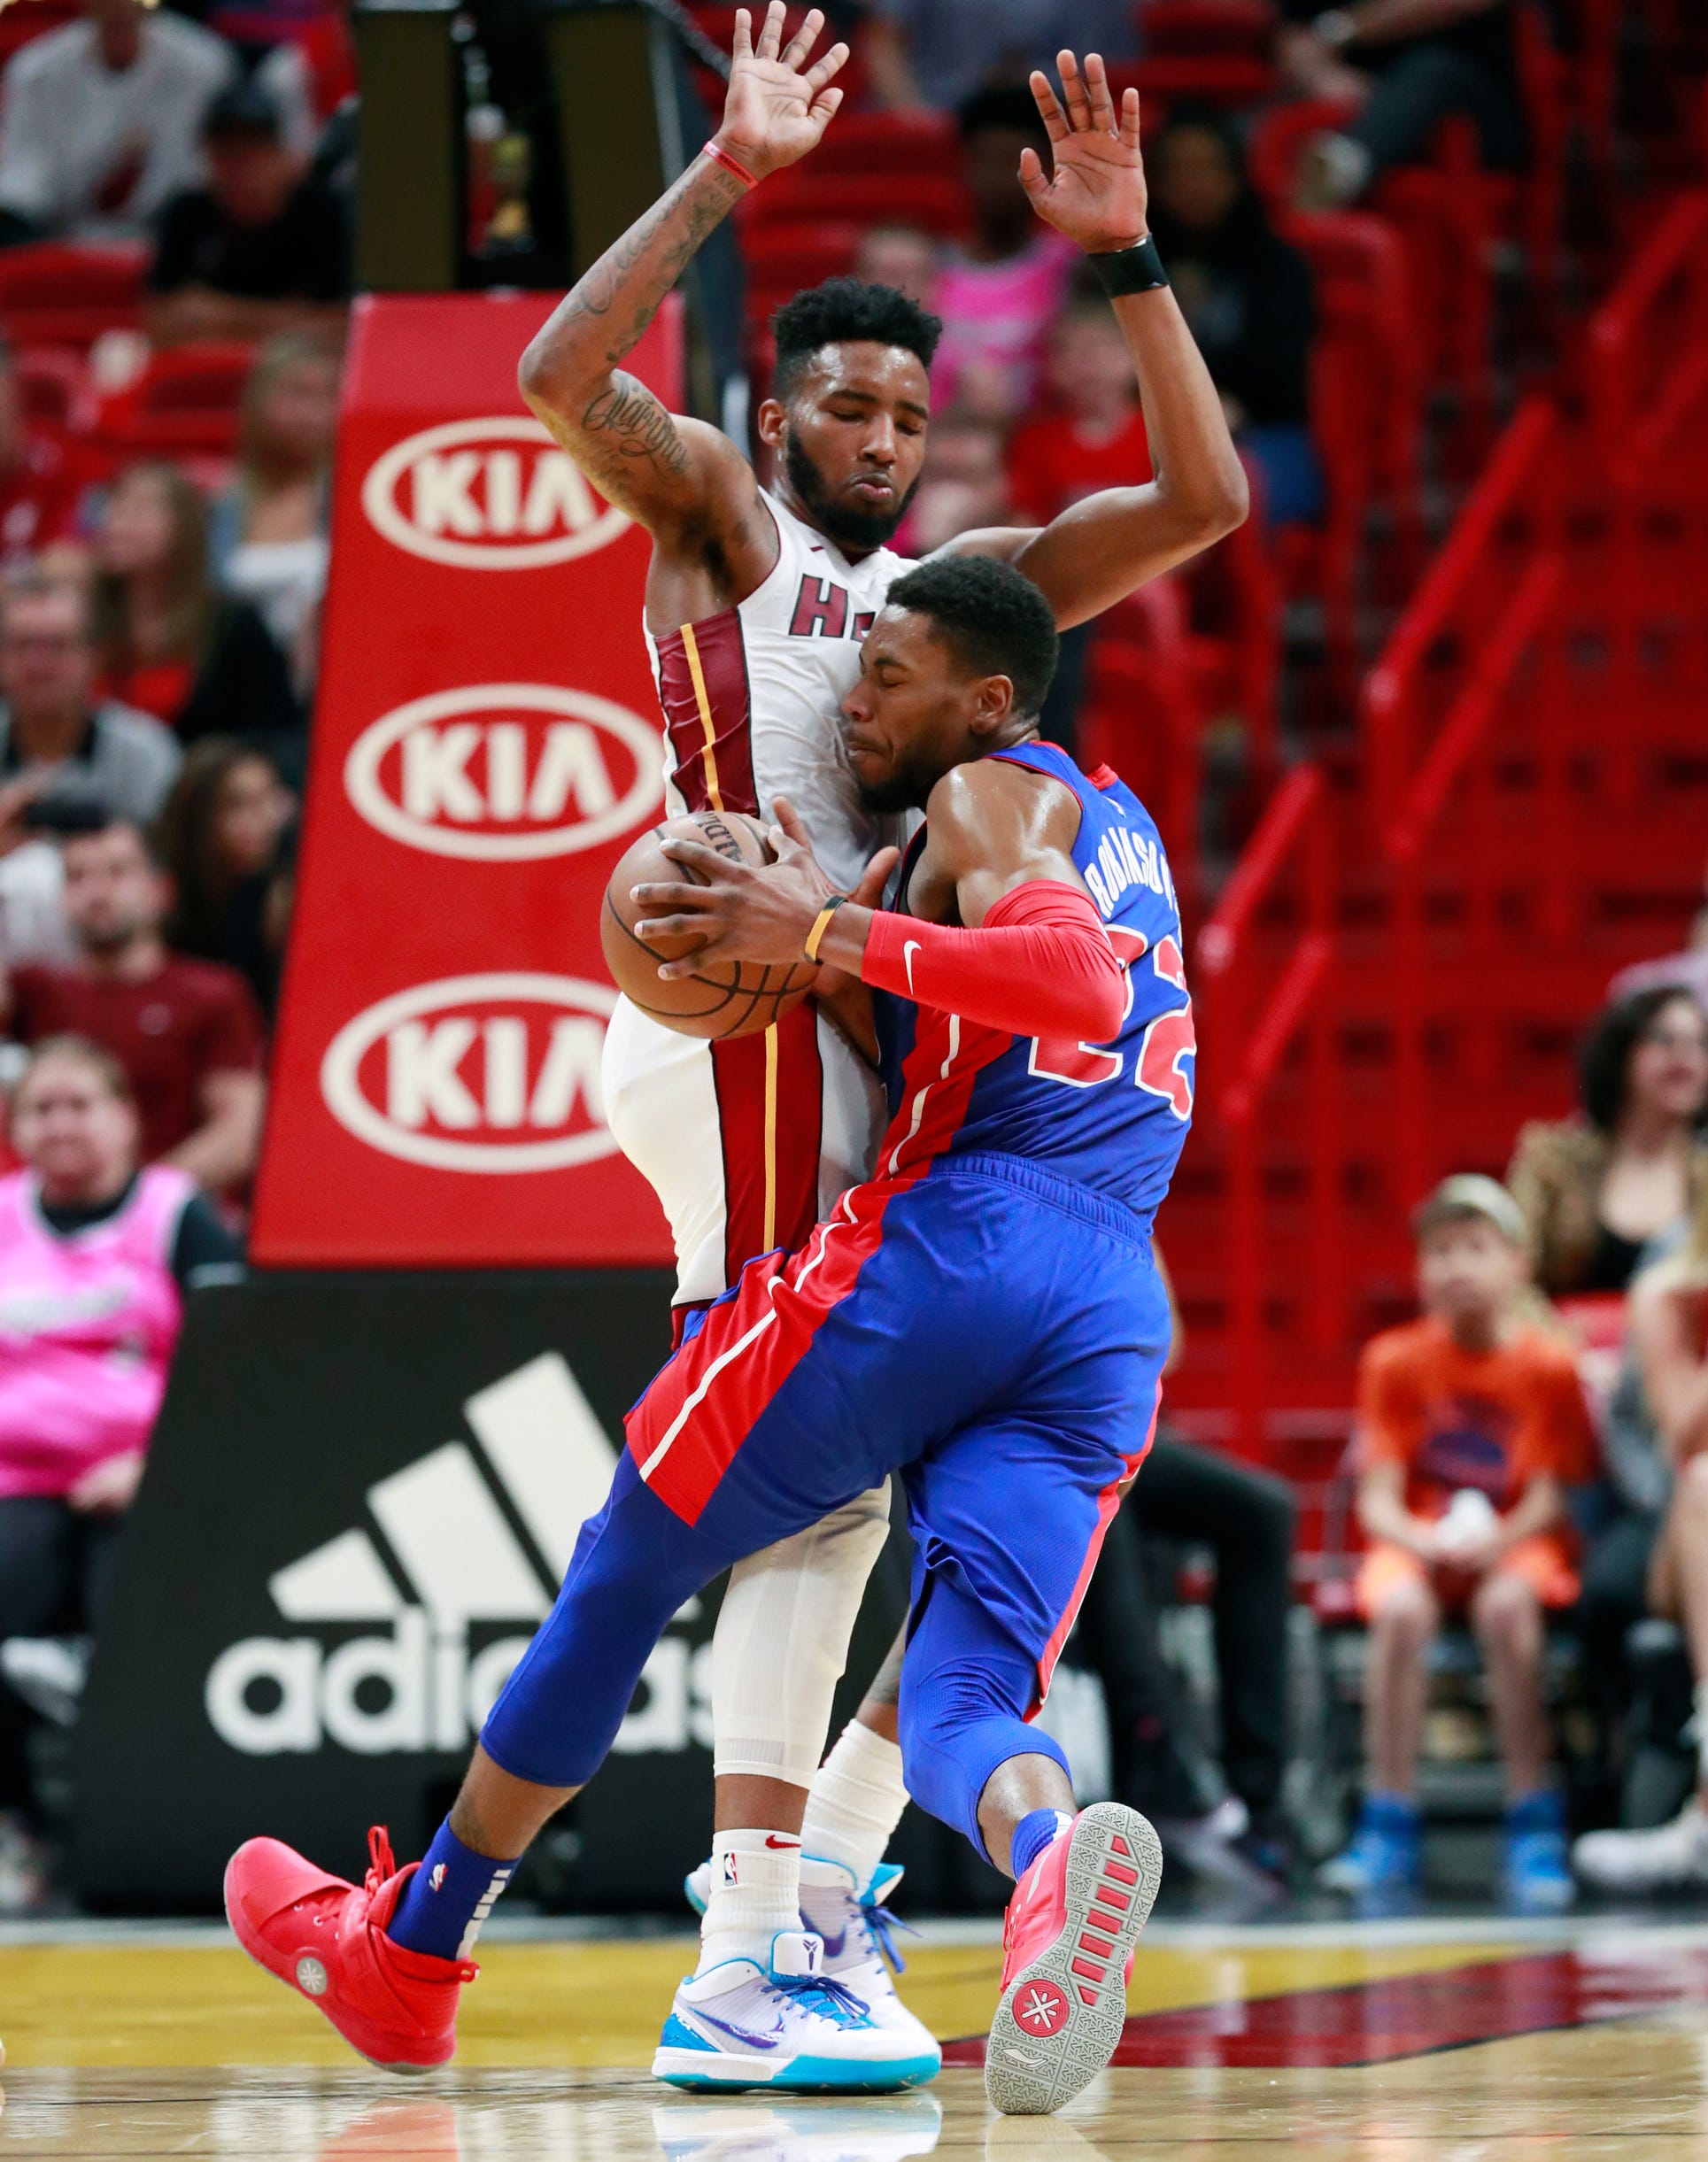 Detroit Pistons guard Glenn Robinson III (22) collides with Miami Heat forward Derrick Jones Jr. as he drives to the basket during the second half.